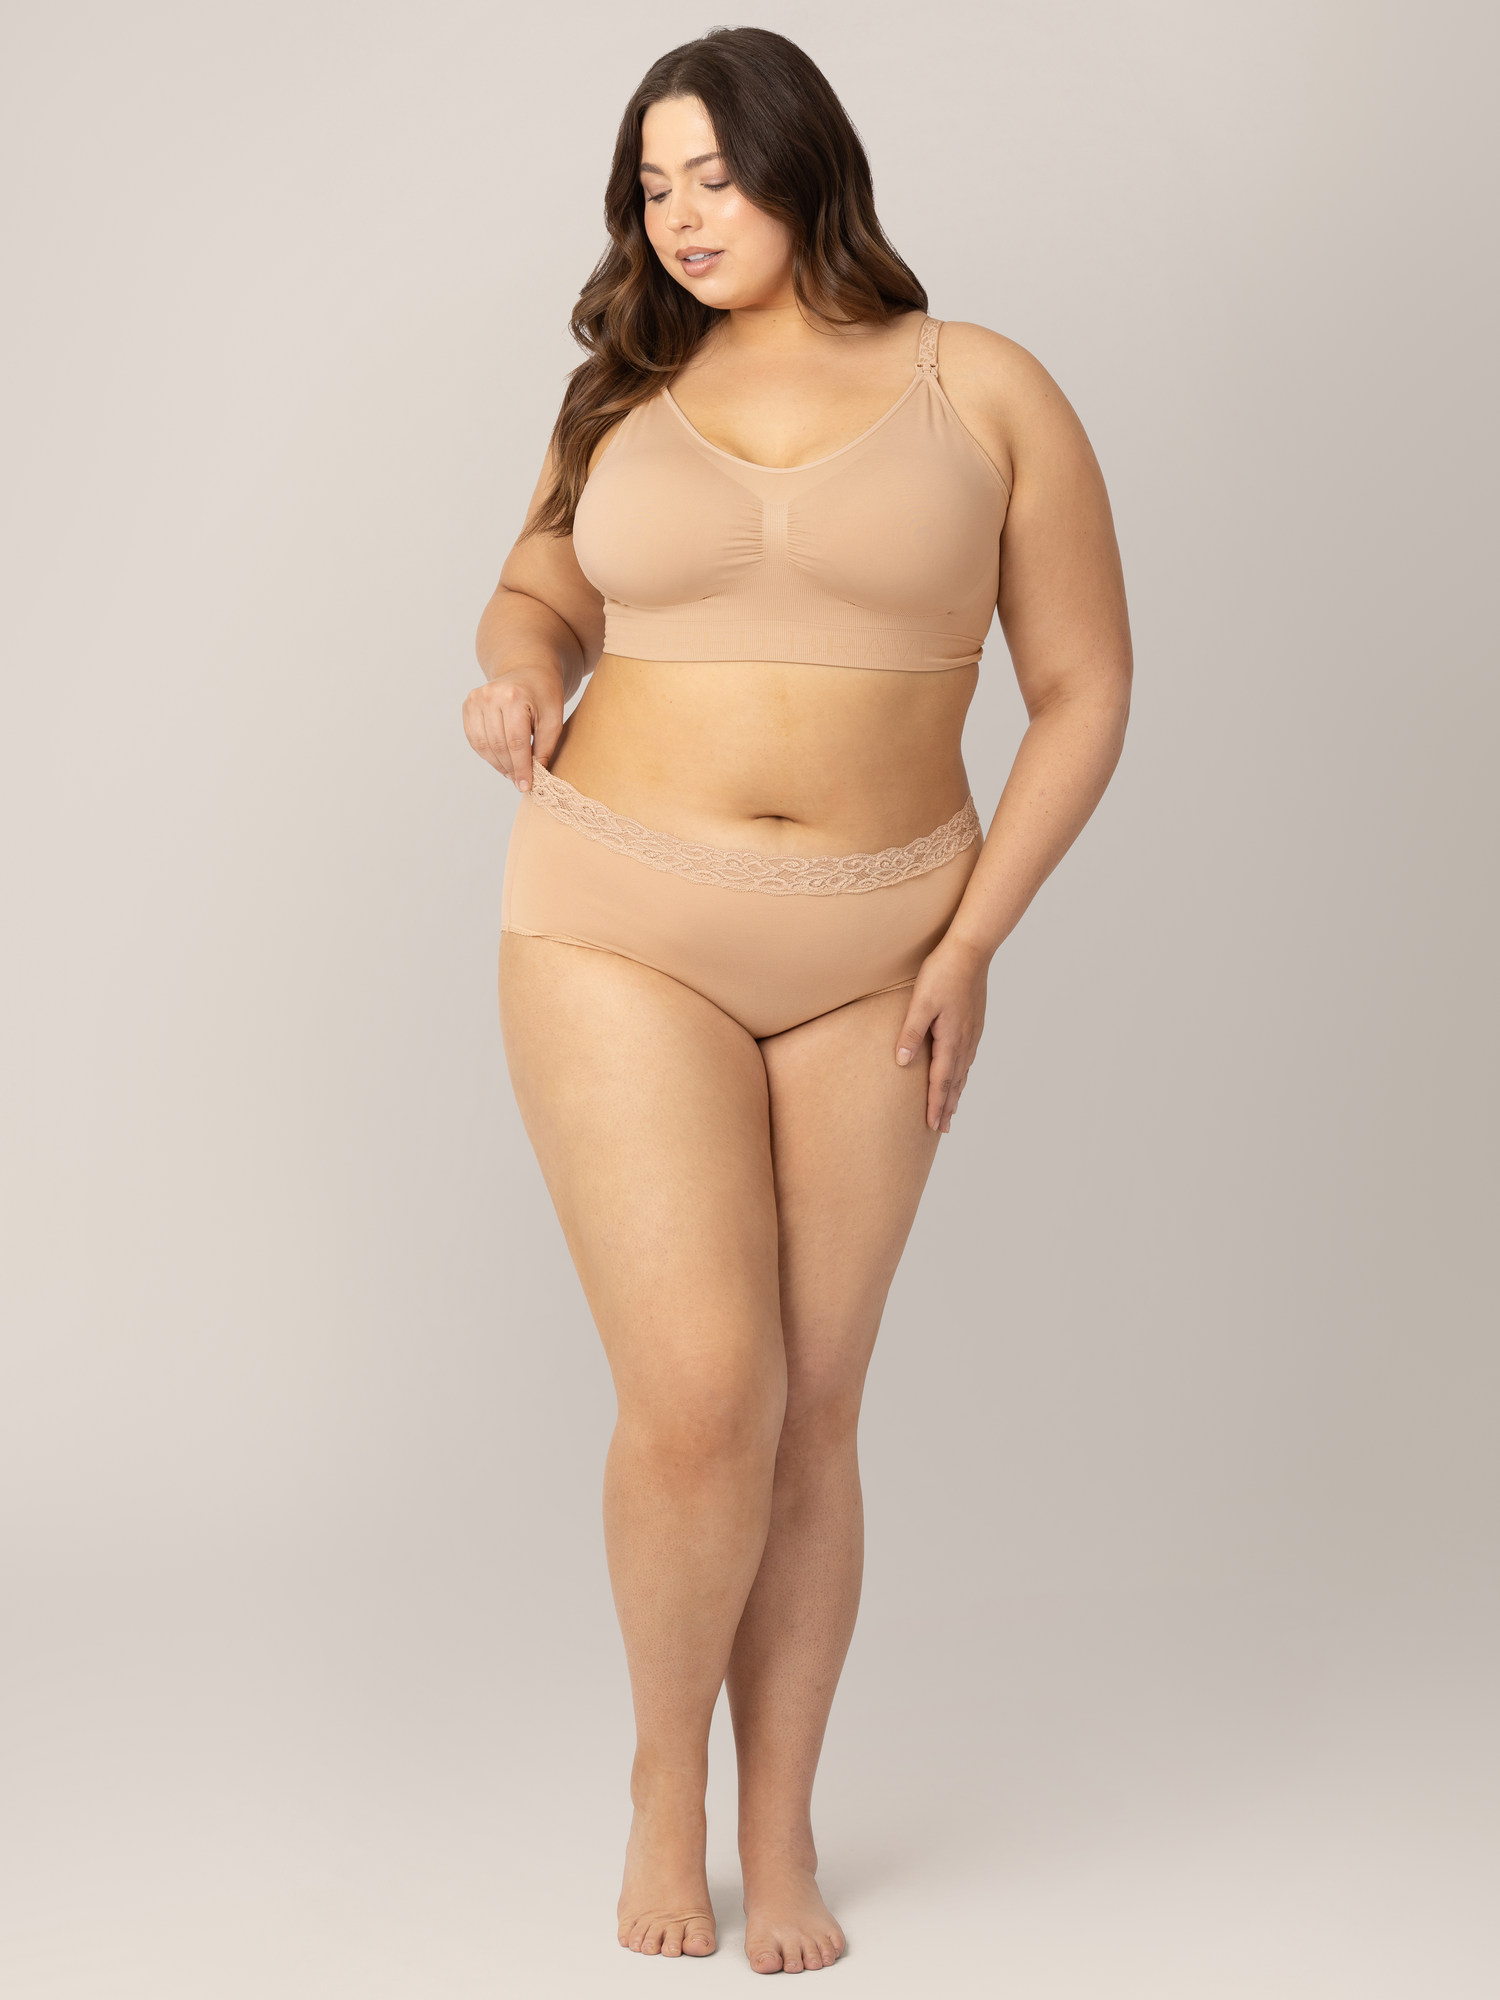 Model wearing the High-Waisted Postpartum Underwear in Assorted Neutrals with her hand holding onto the waistband.